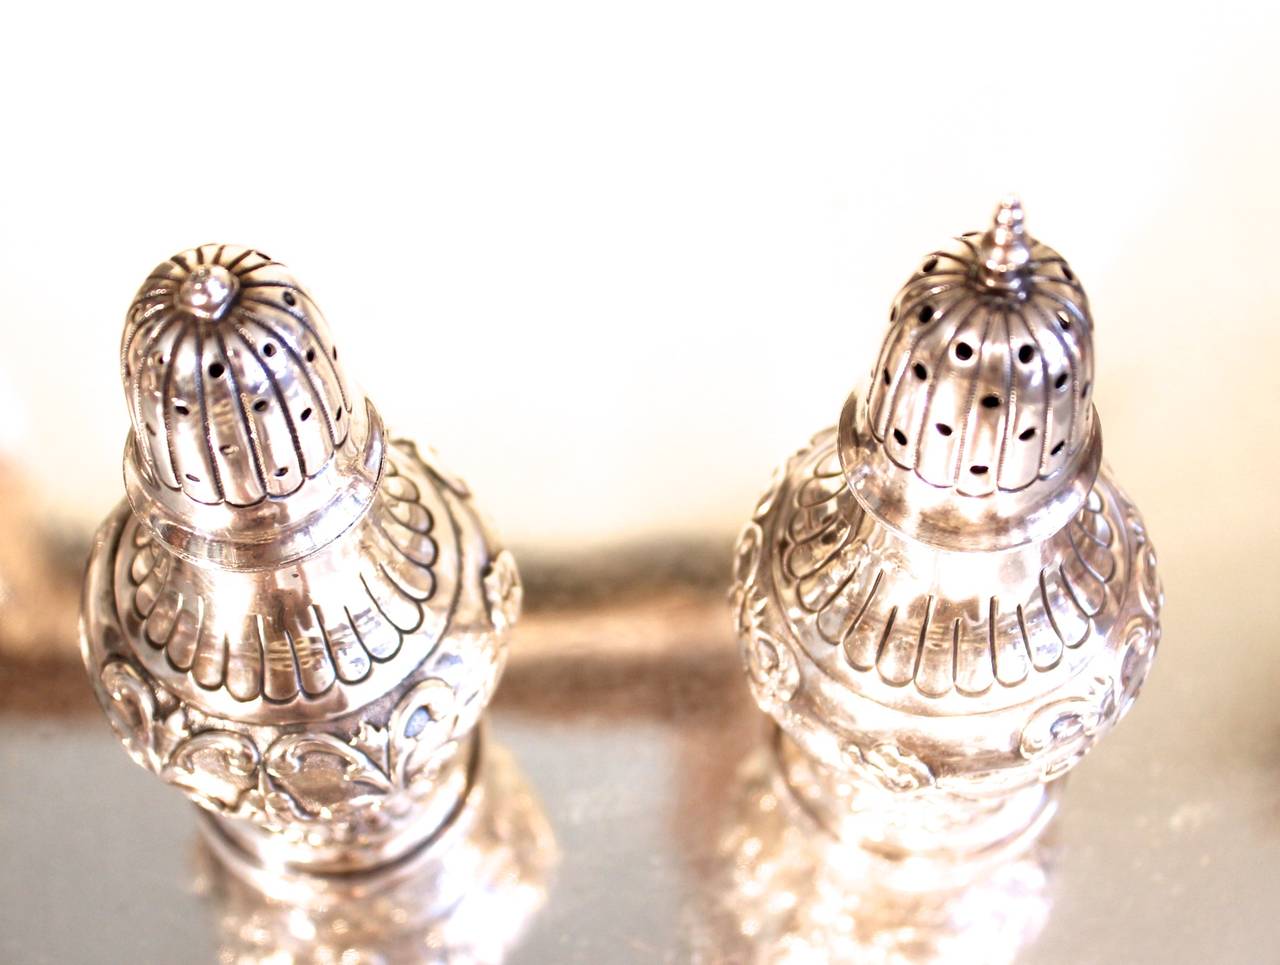 Pair of Dutch Silver Salt and Pepper Shakers In Excellent Condition For Sale In Charlottesville, VA